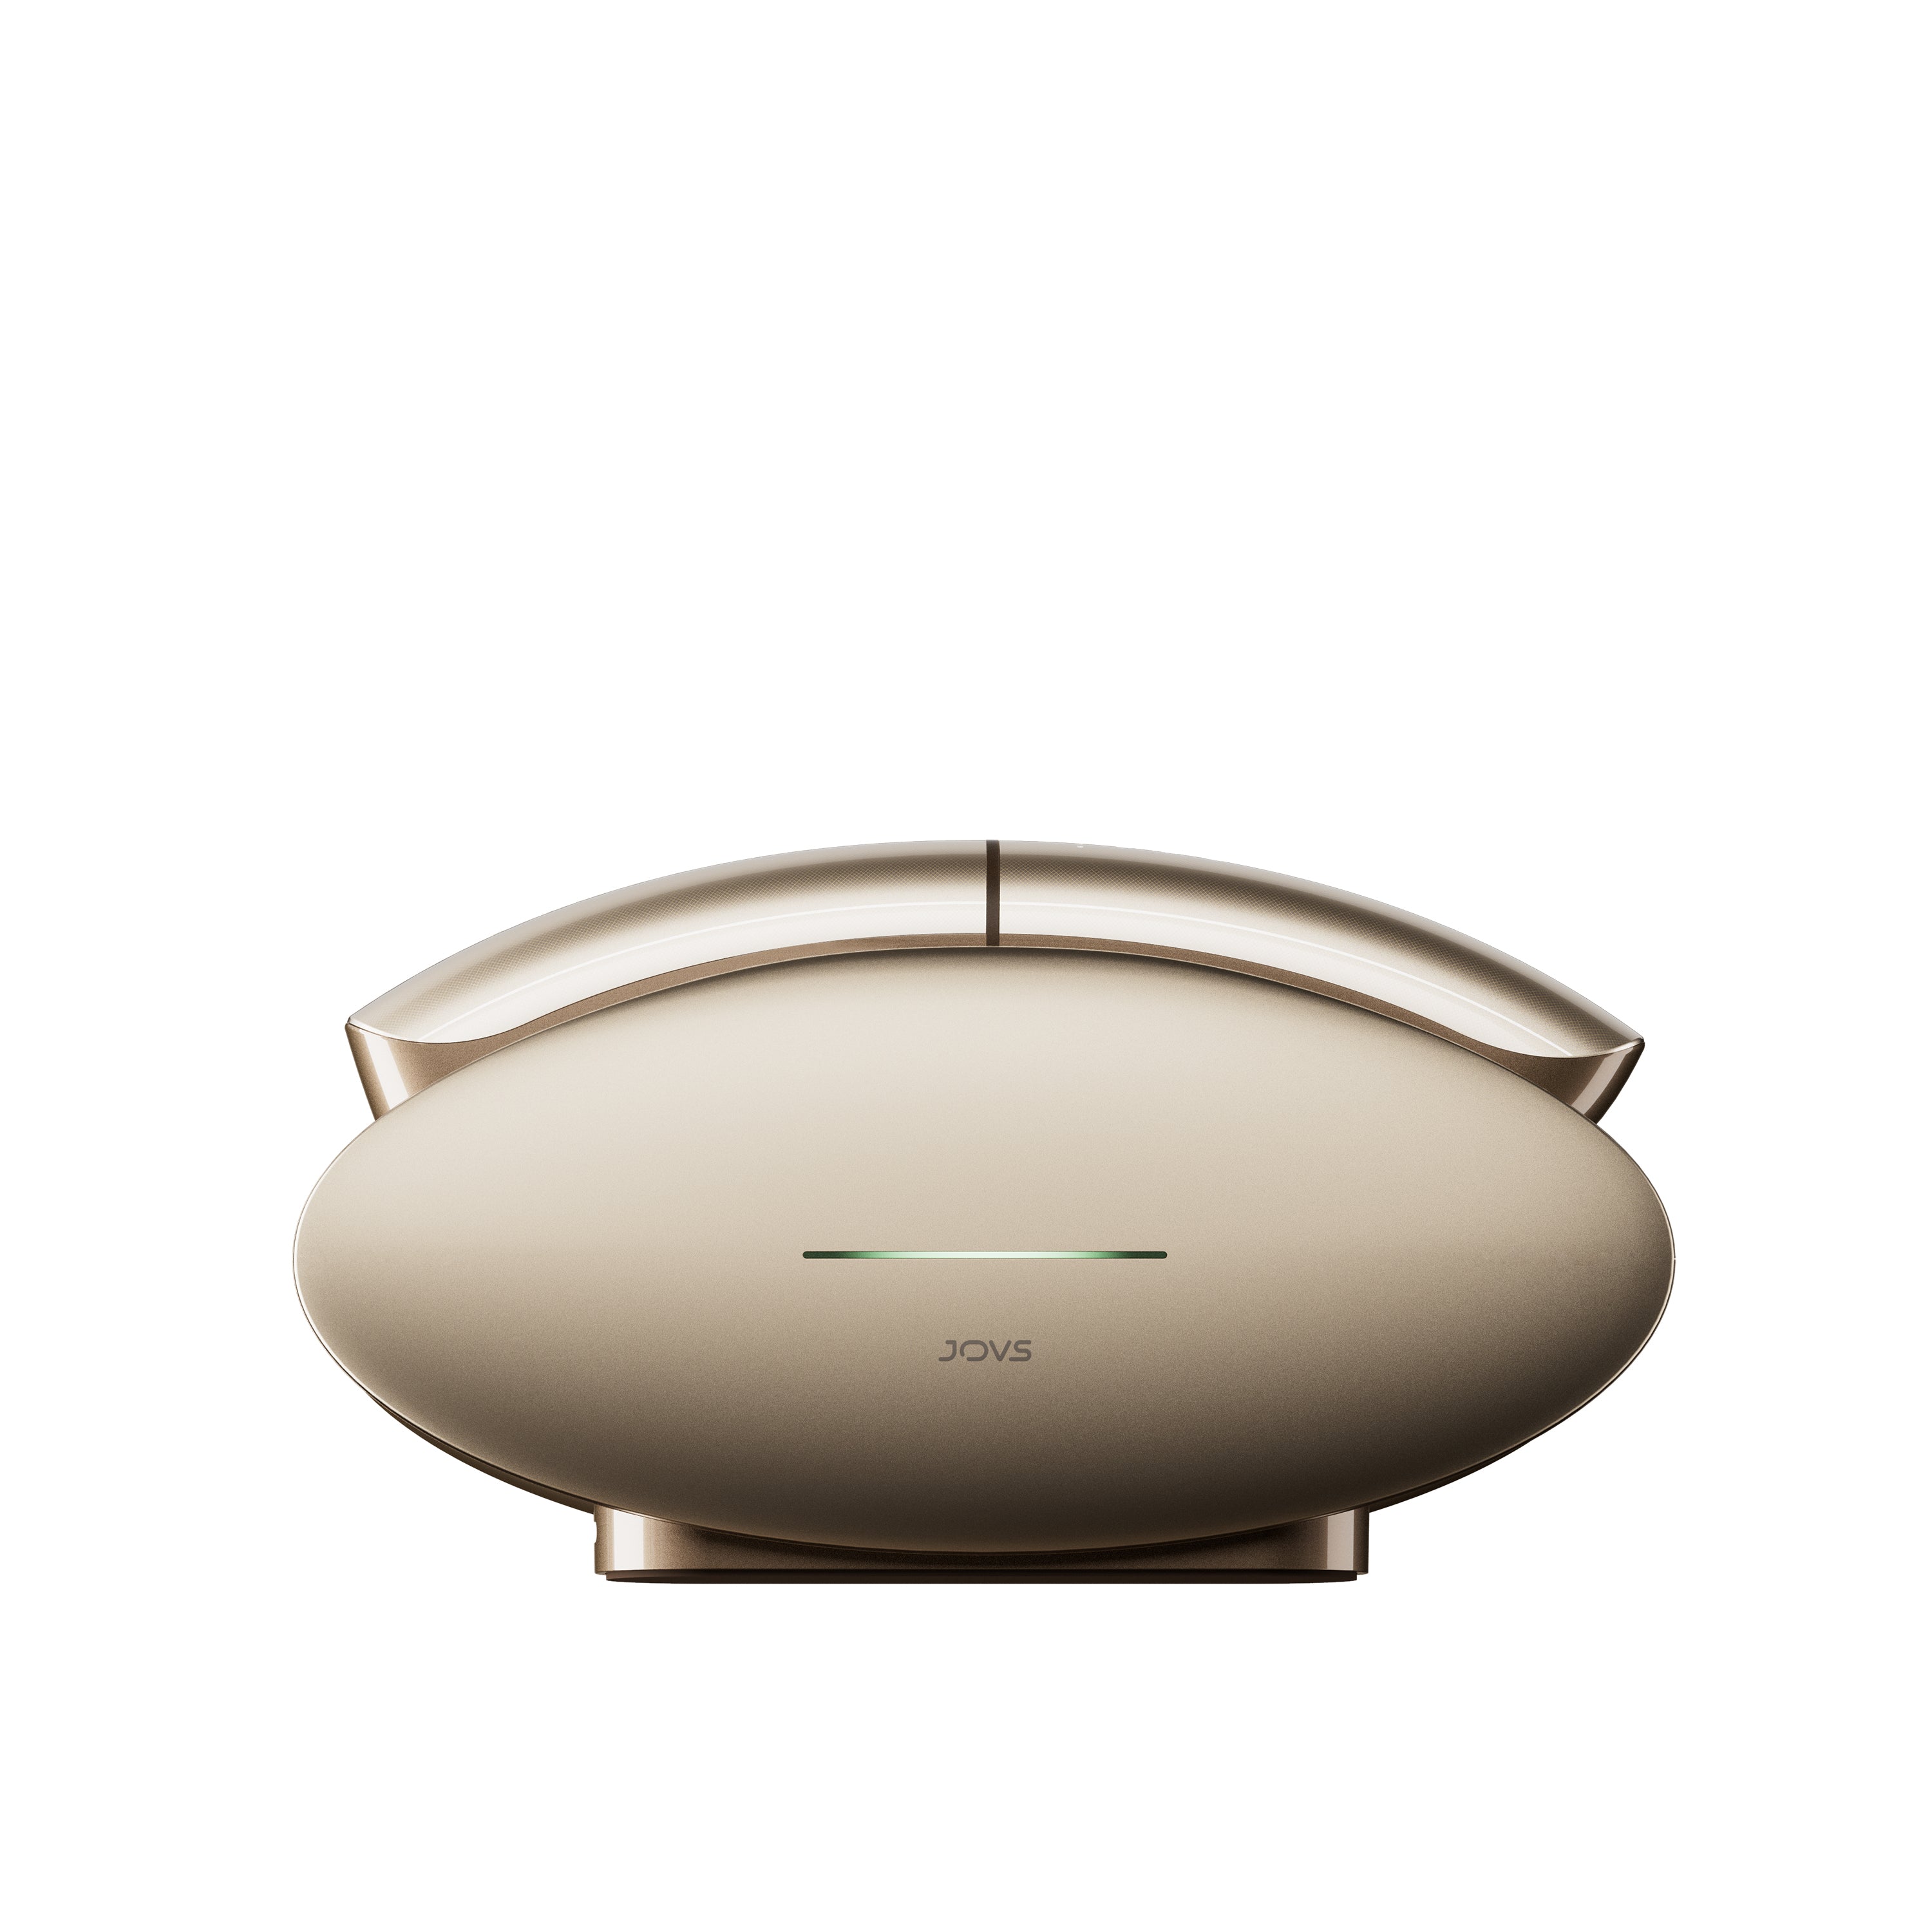 JOVS Slimax Microcurrent Full-Body Anti-Aging Device in Gold.